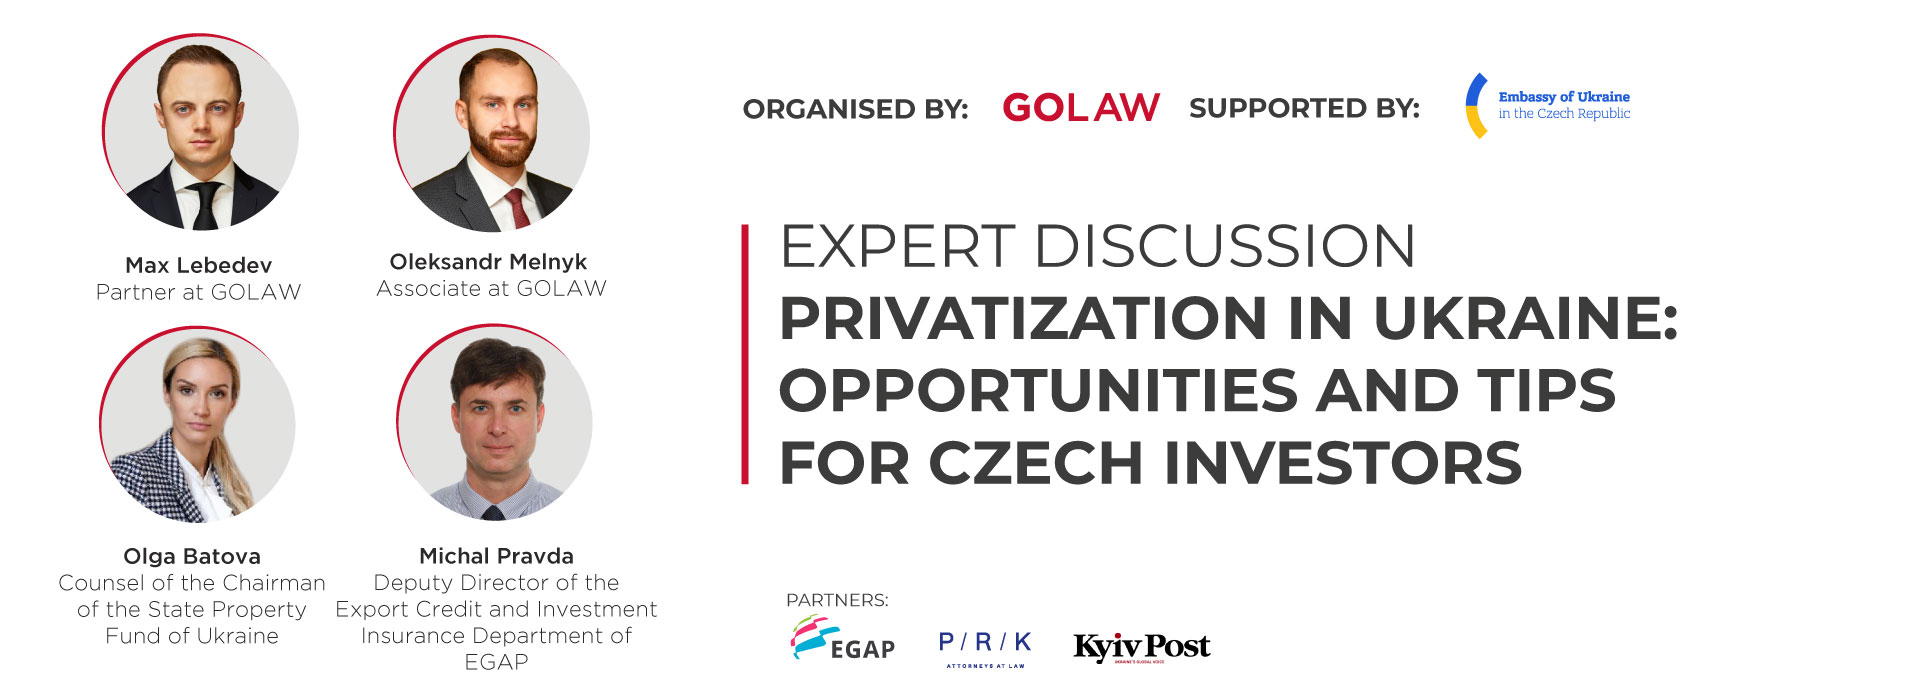 Privatization in Ukraine: Opportunities and Tips for Czech Investors